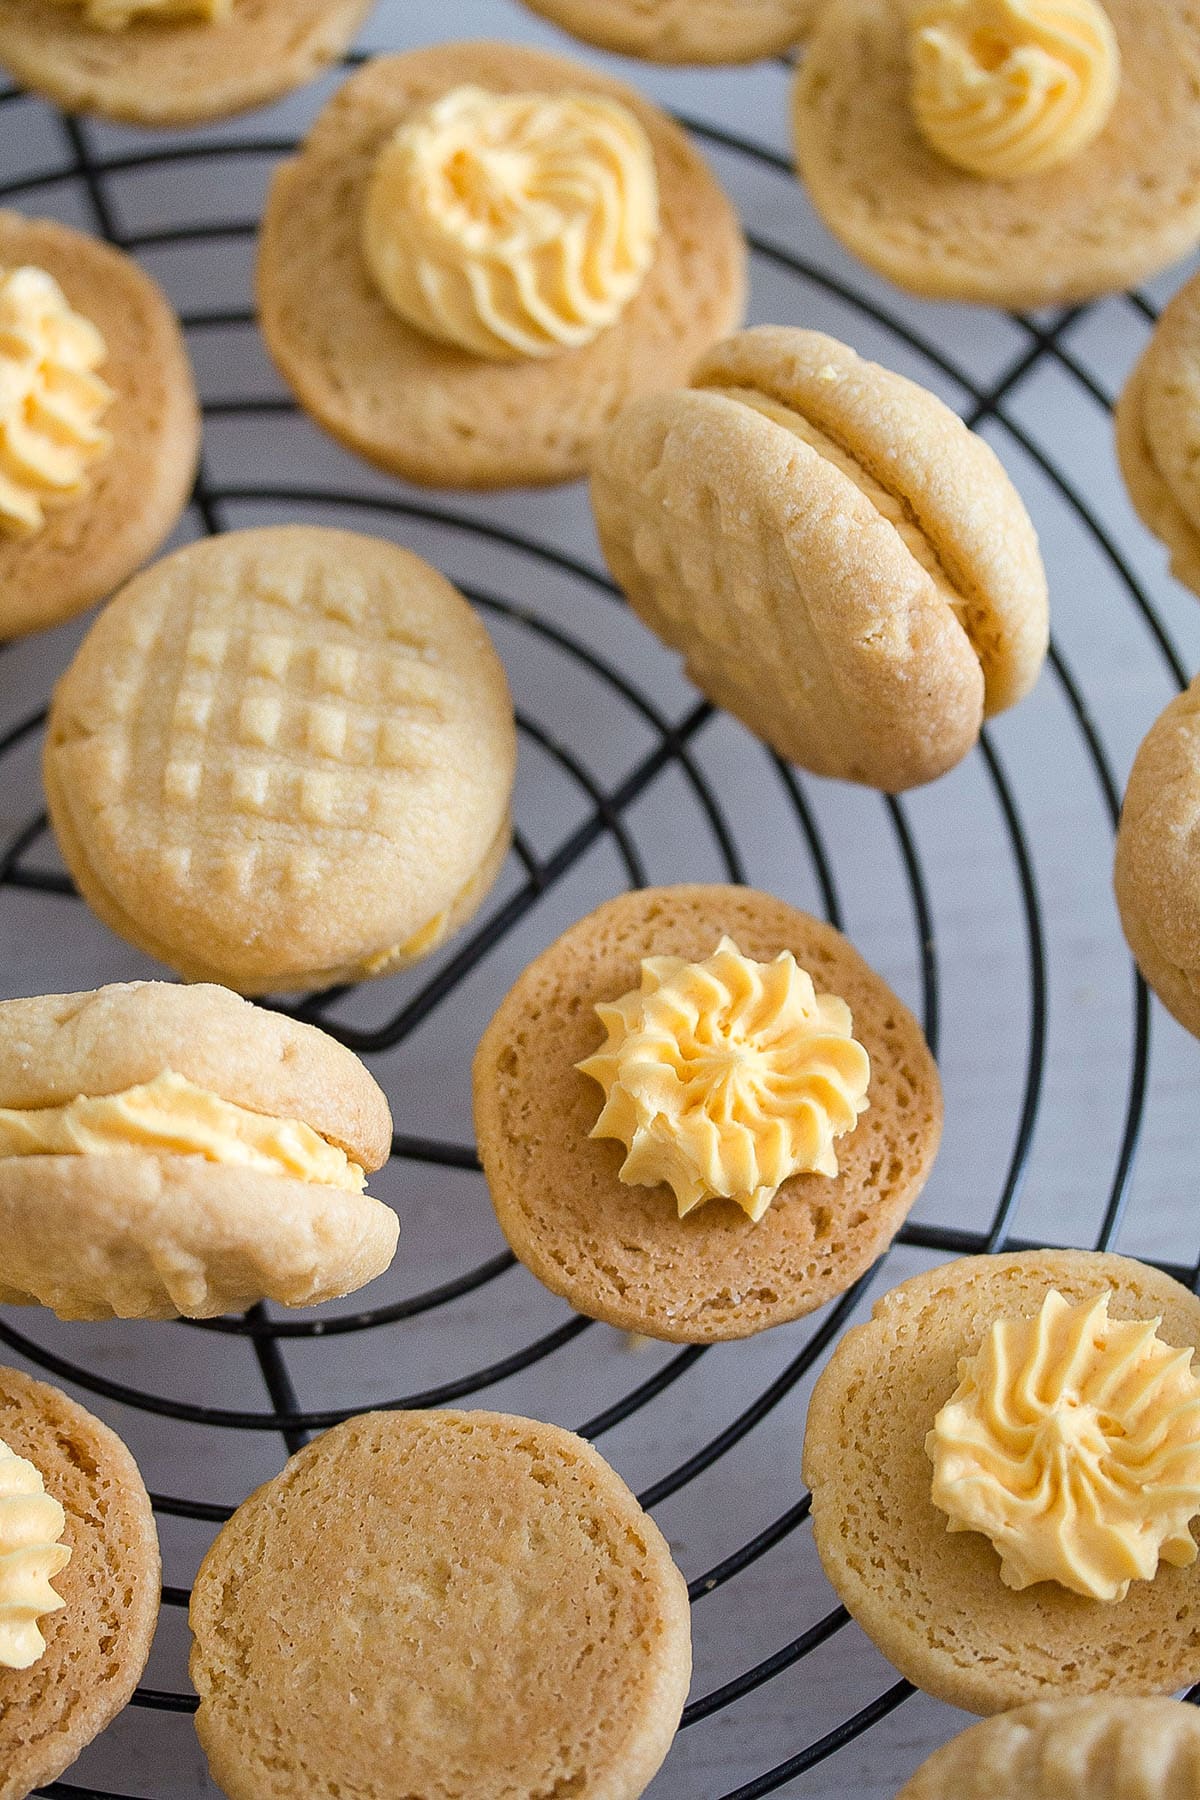 many custard cream biscuits on a wire rack, some showing the custard filling inside.